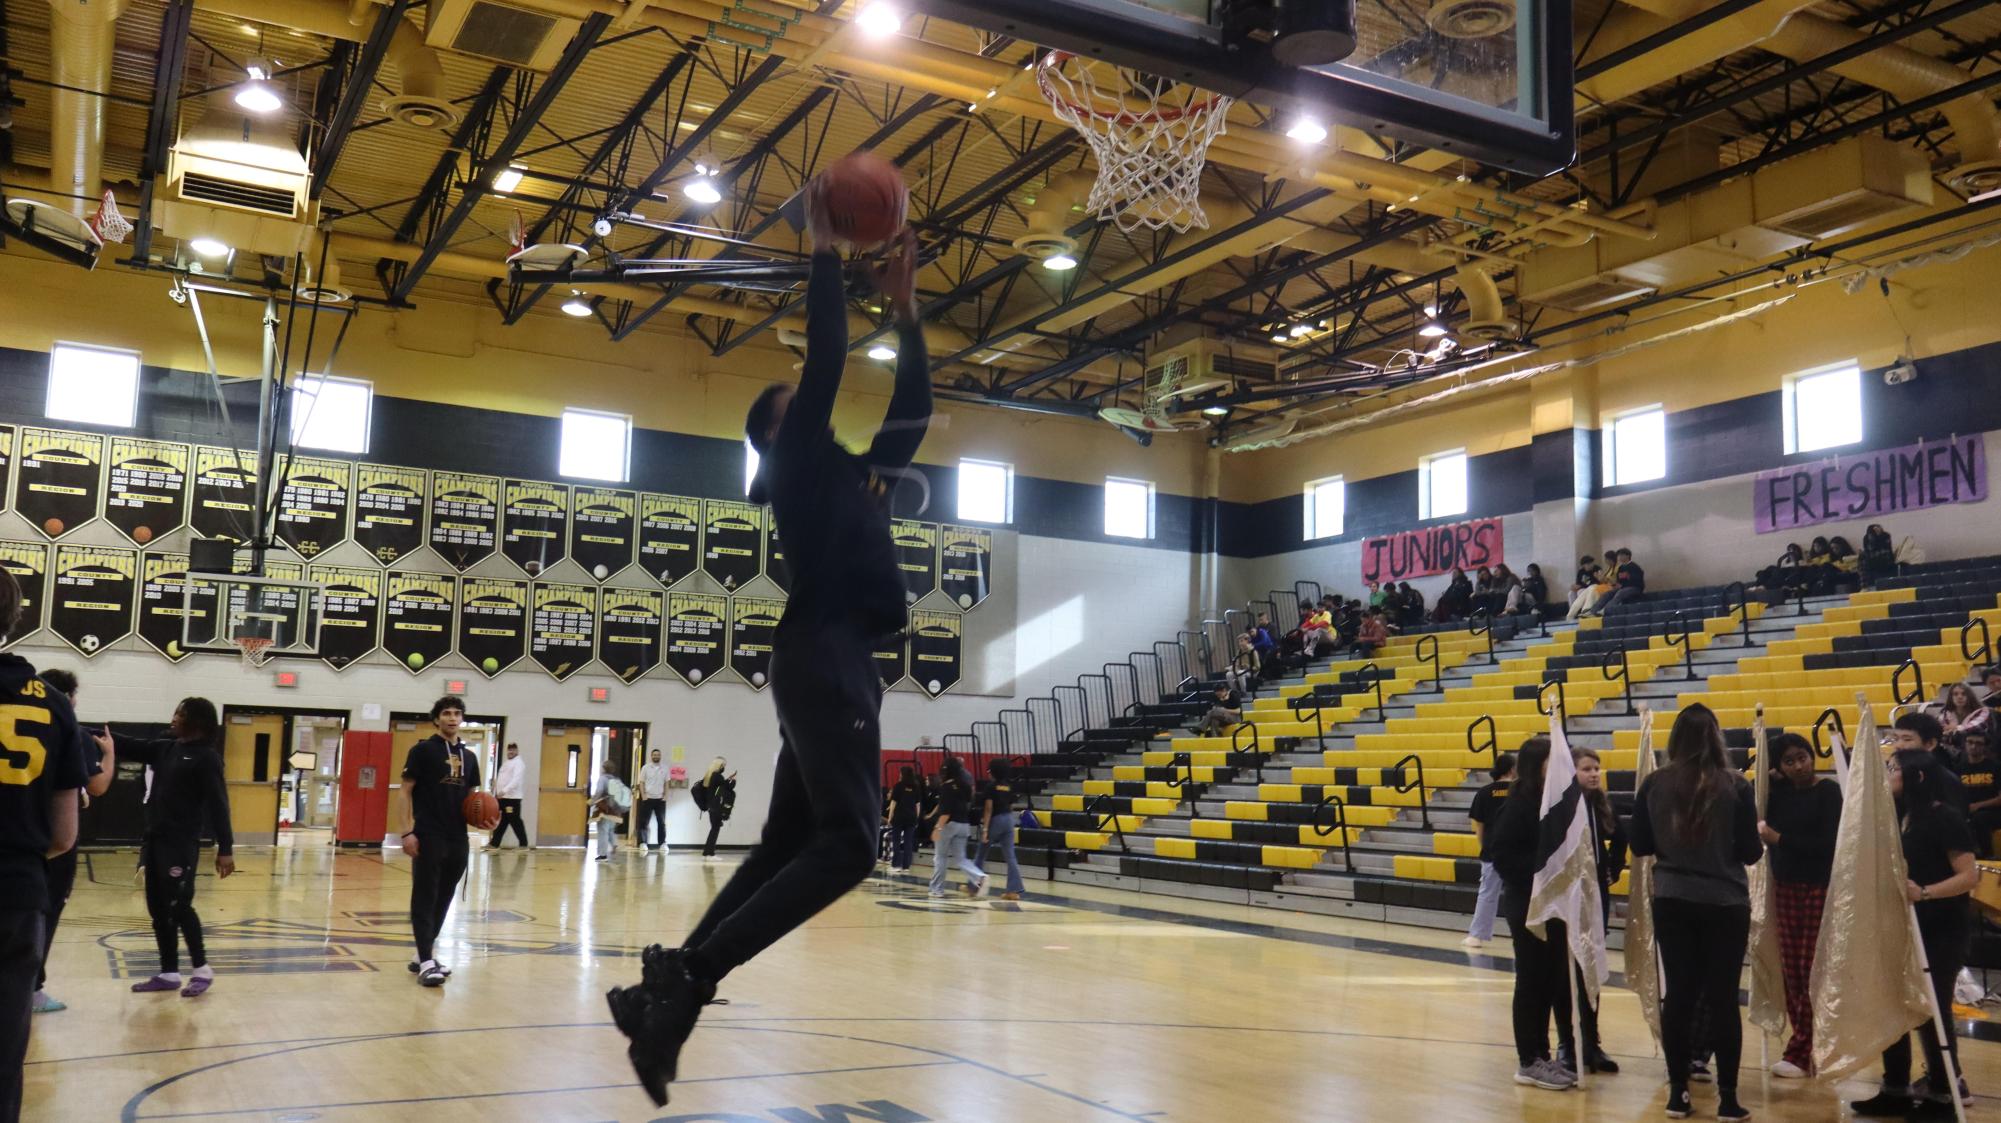 Senior Dante Mayo dunks on the basketball court during the transition between grades attending the pep rallies. Mayo performed for the underclassmen with his fellow teammates on the boys varsity basketball team.